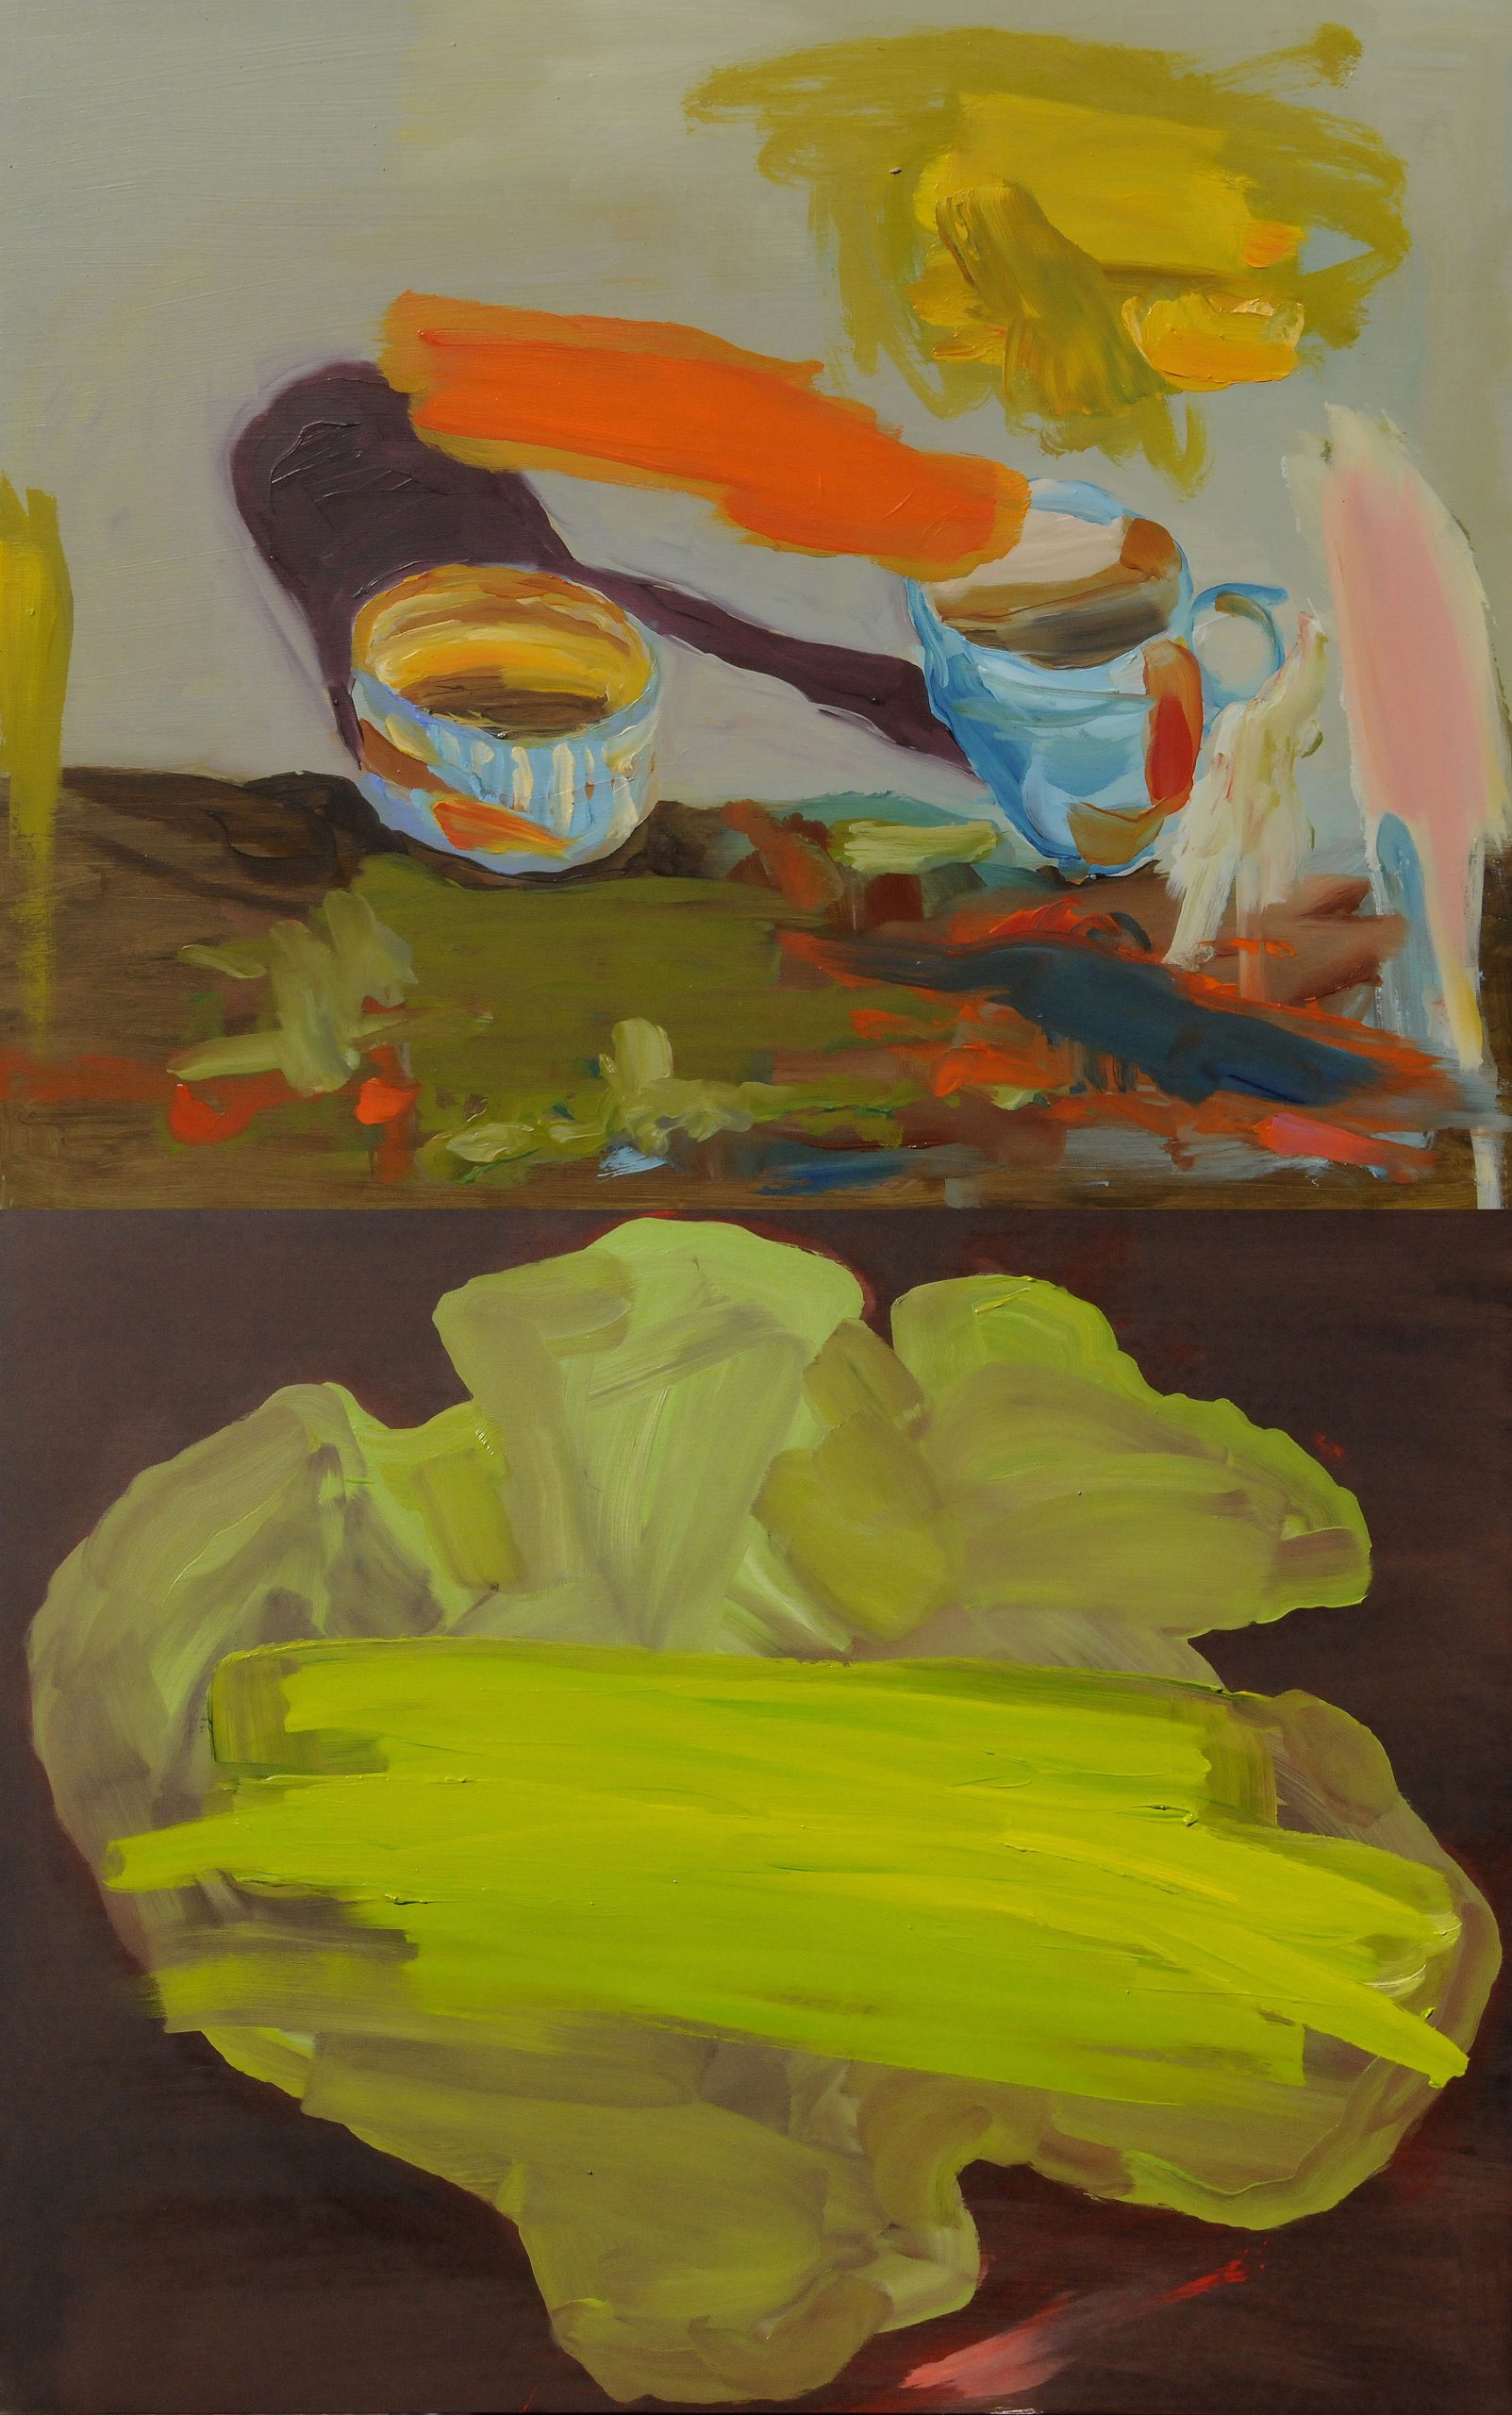 Carroll_The slippery green Granny Smith apple - Diptych_oil on board_81.5 x 51cm_email